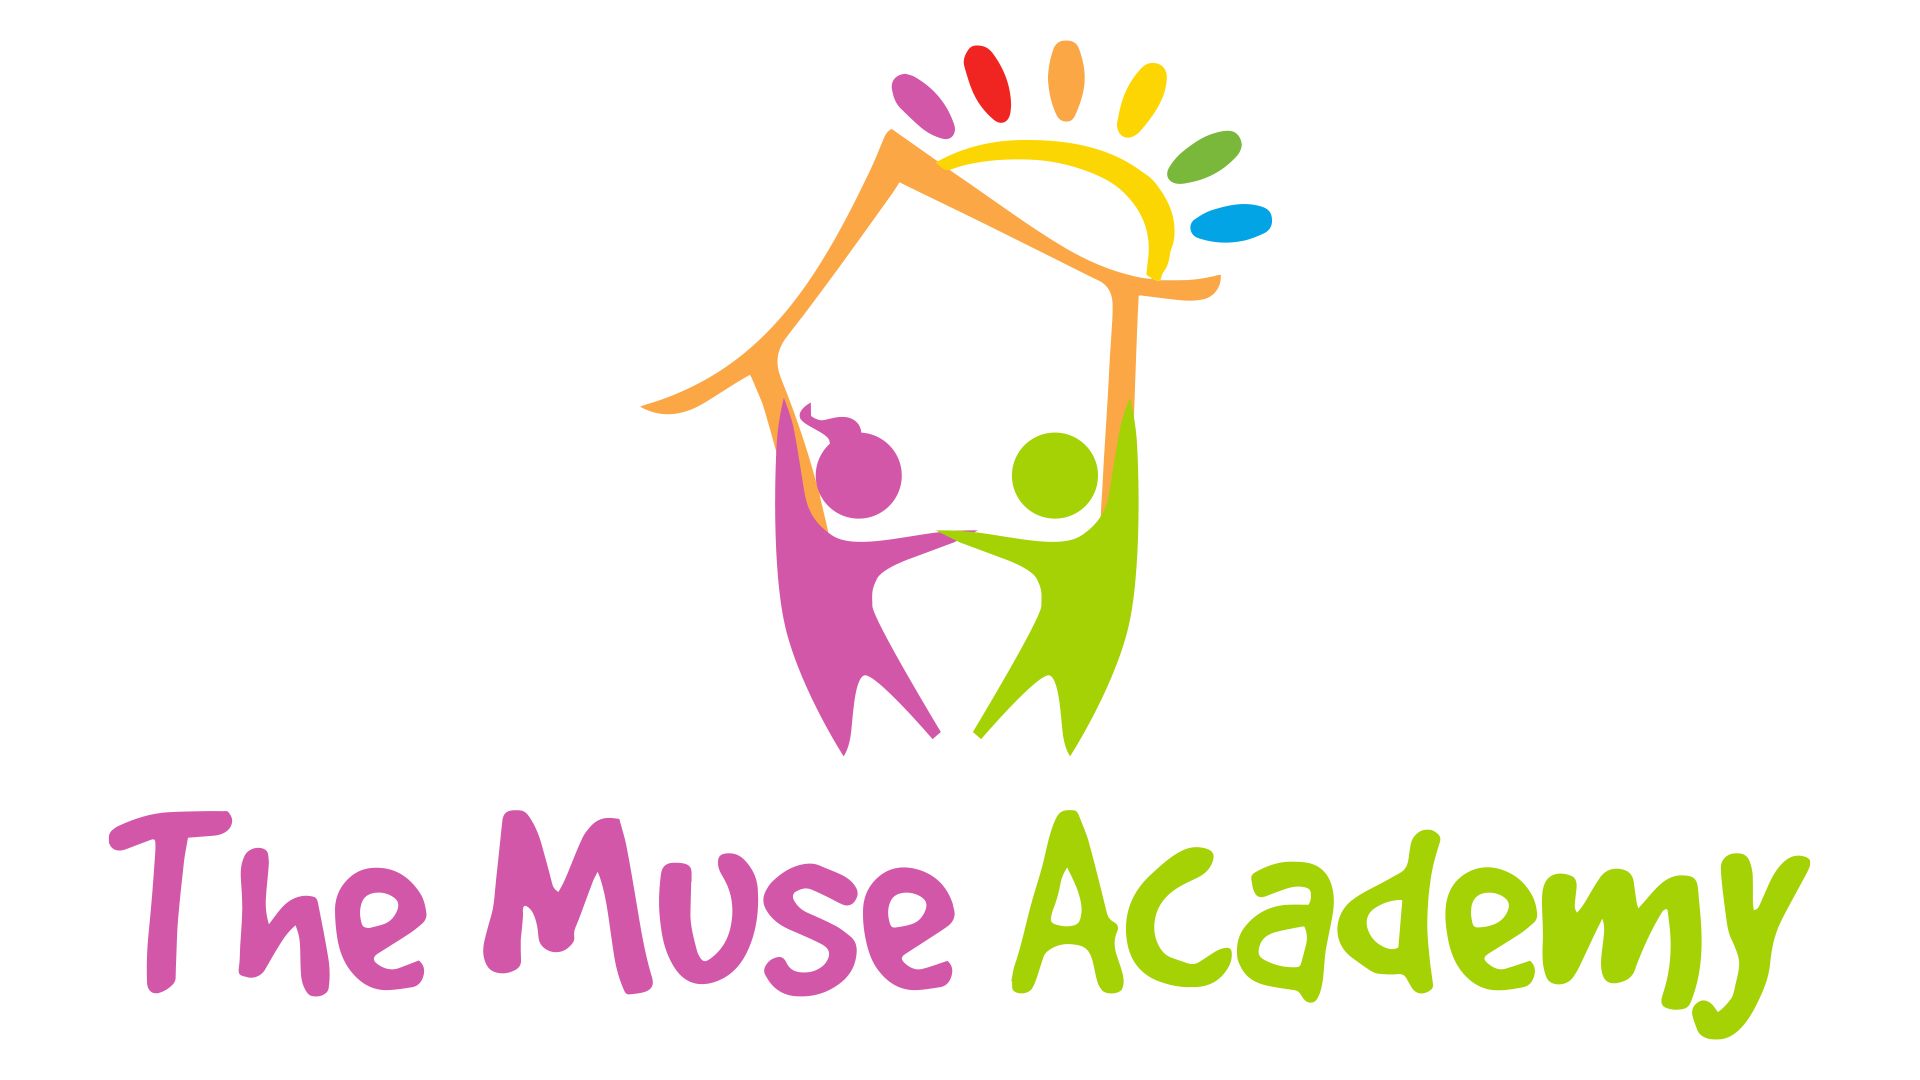 The Muse Academy